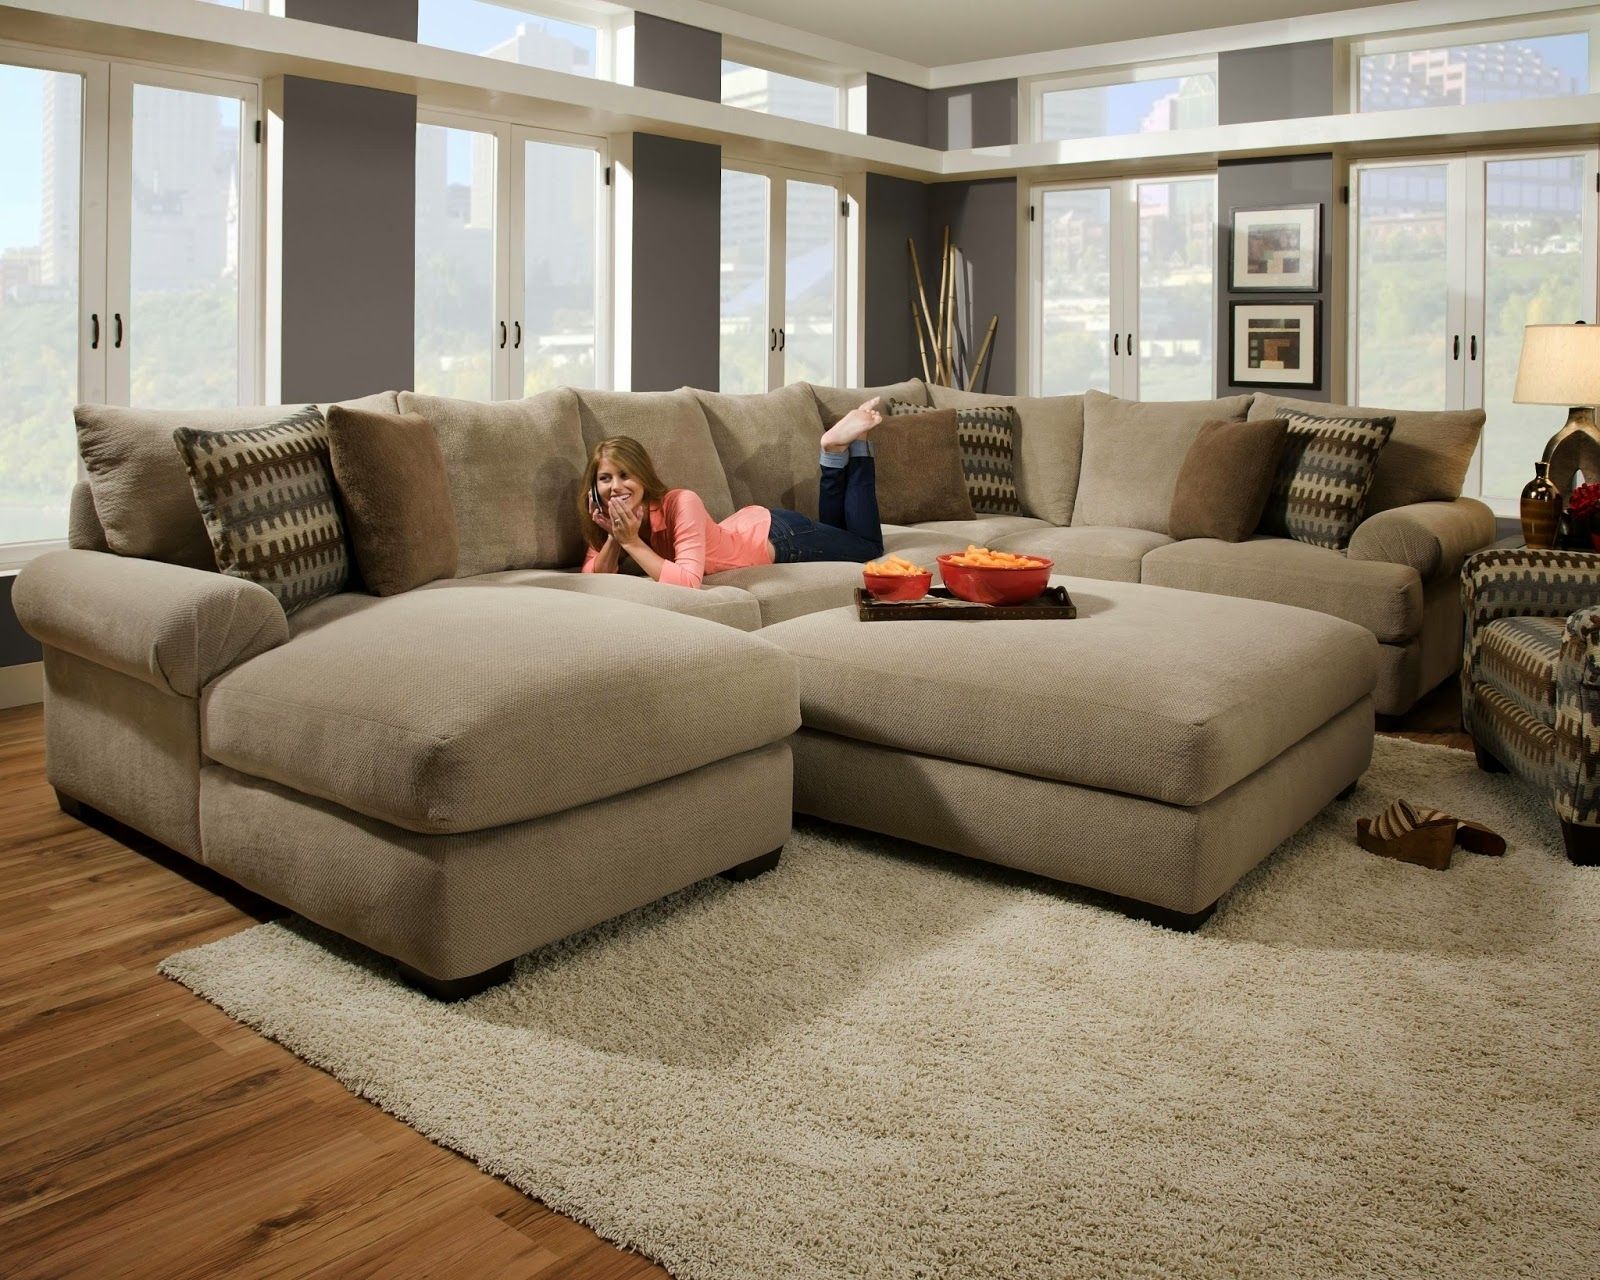 Sectional Sofa With Ottoman – Foter Regarding Sofas With Ottomans In Brown (View 6 of 15)